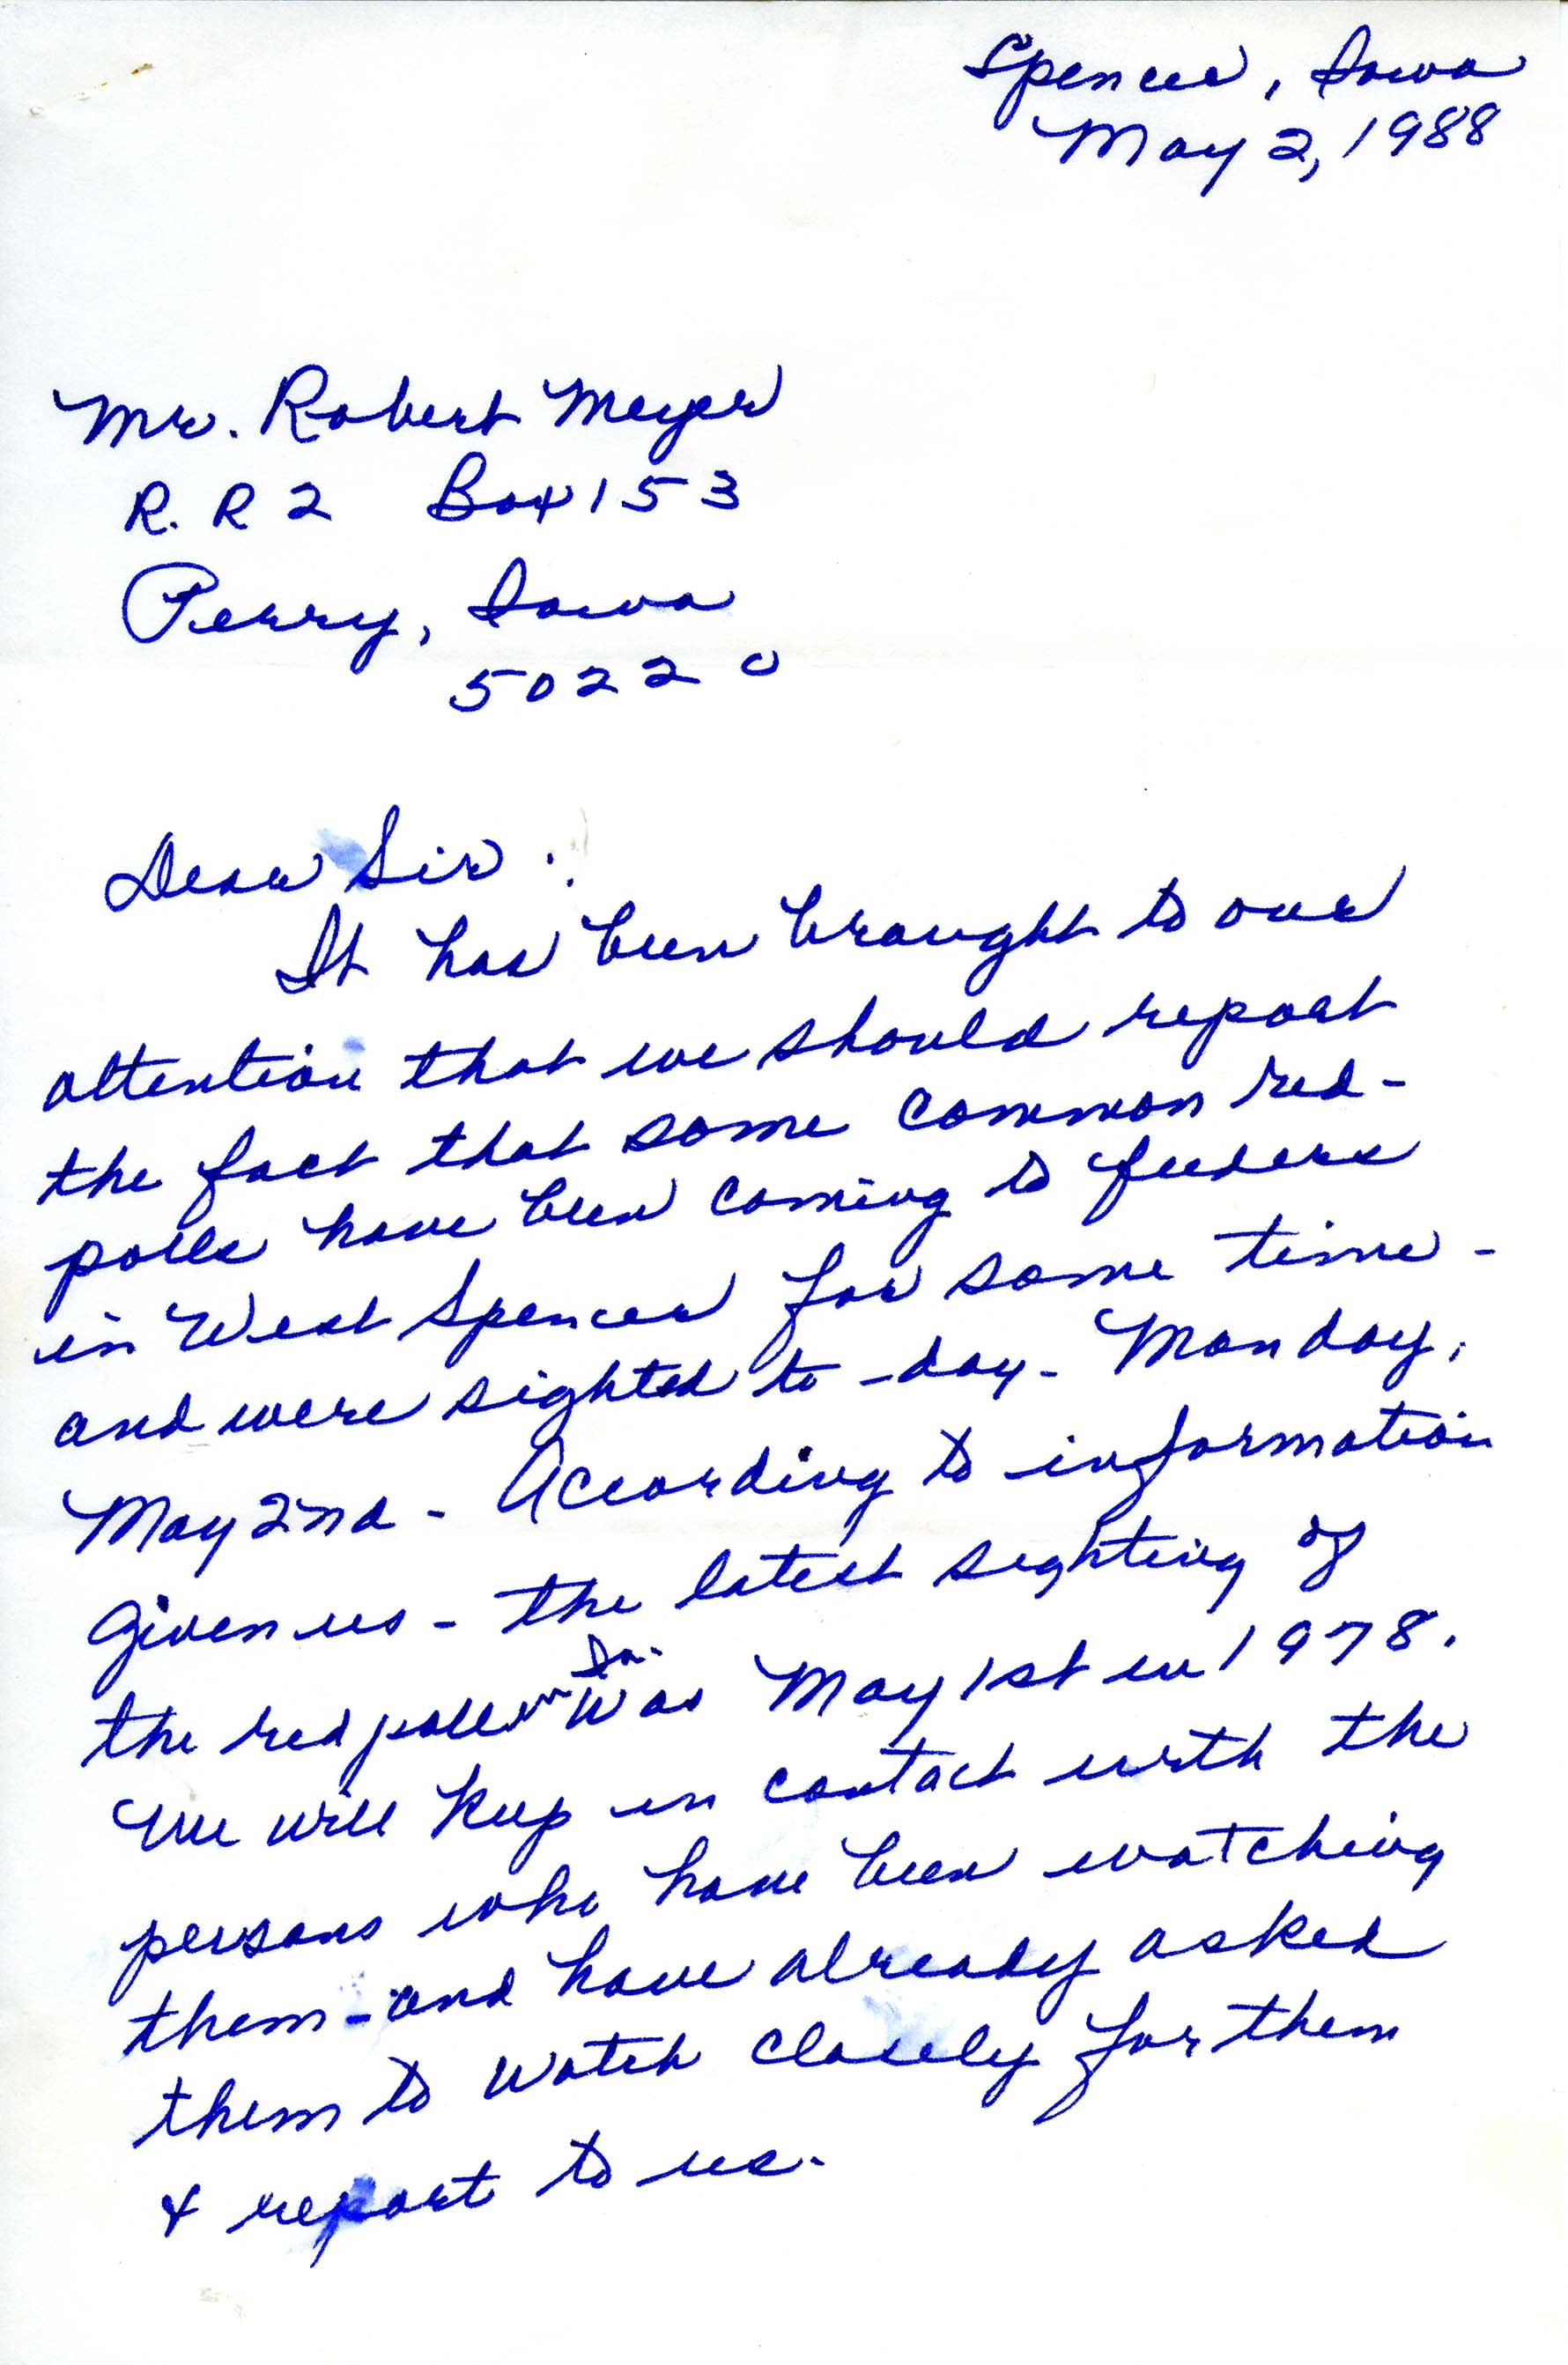 Dixie Kanago letter to Robert K. Myers regarding Common Redpoll and Red Crossbill sightings, May 2, 1988